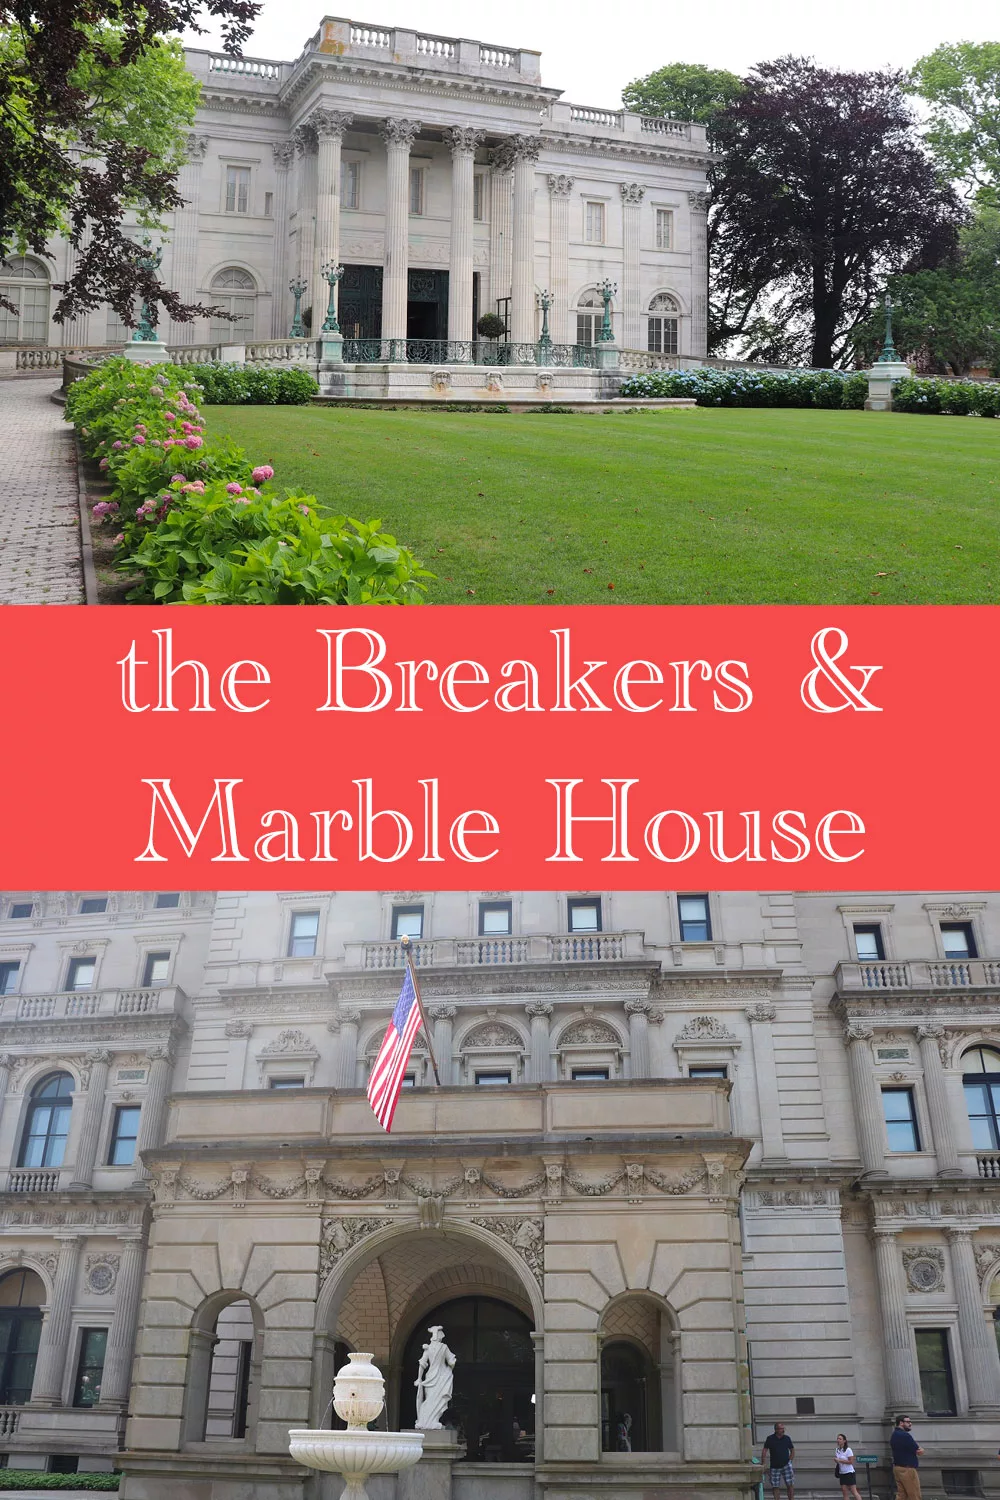 The Breakers & Marble House